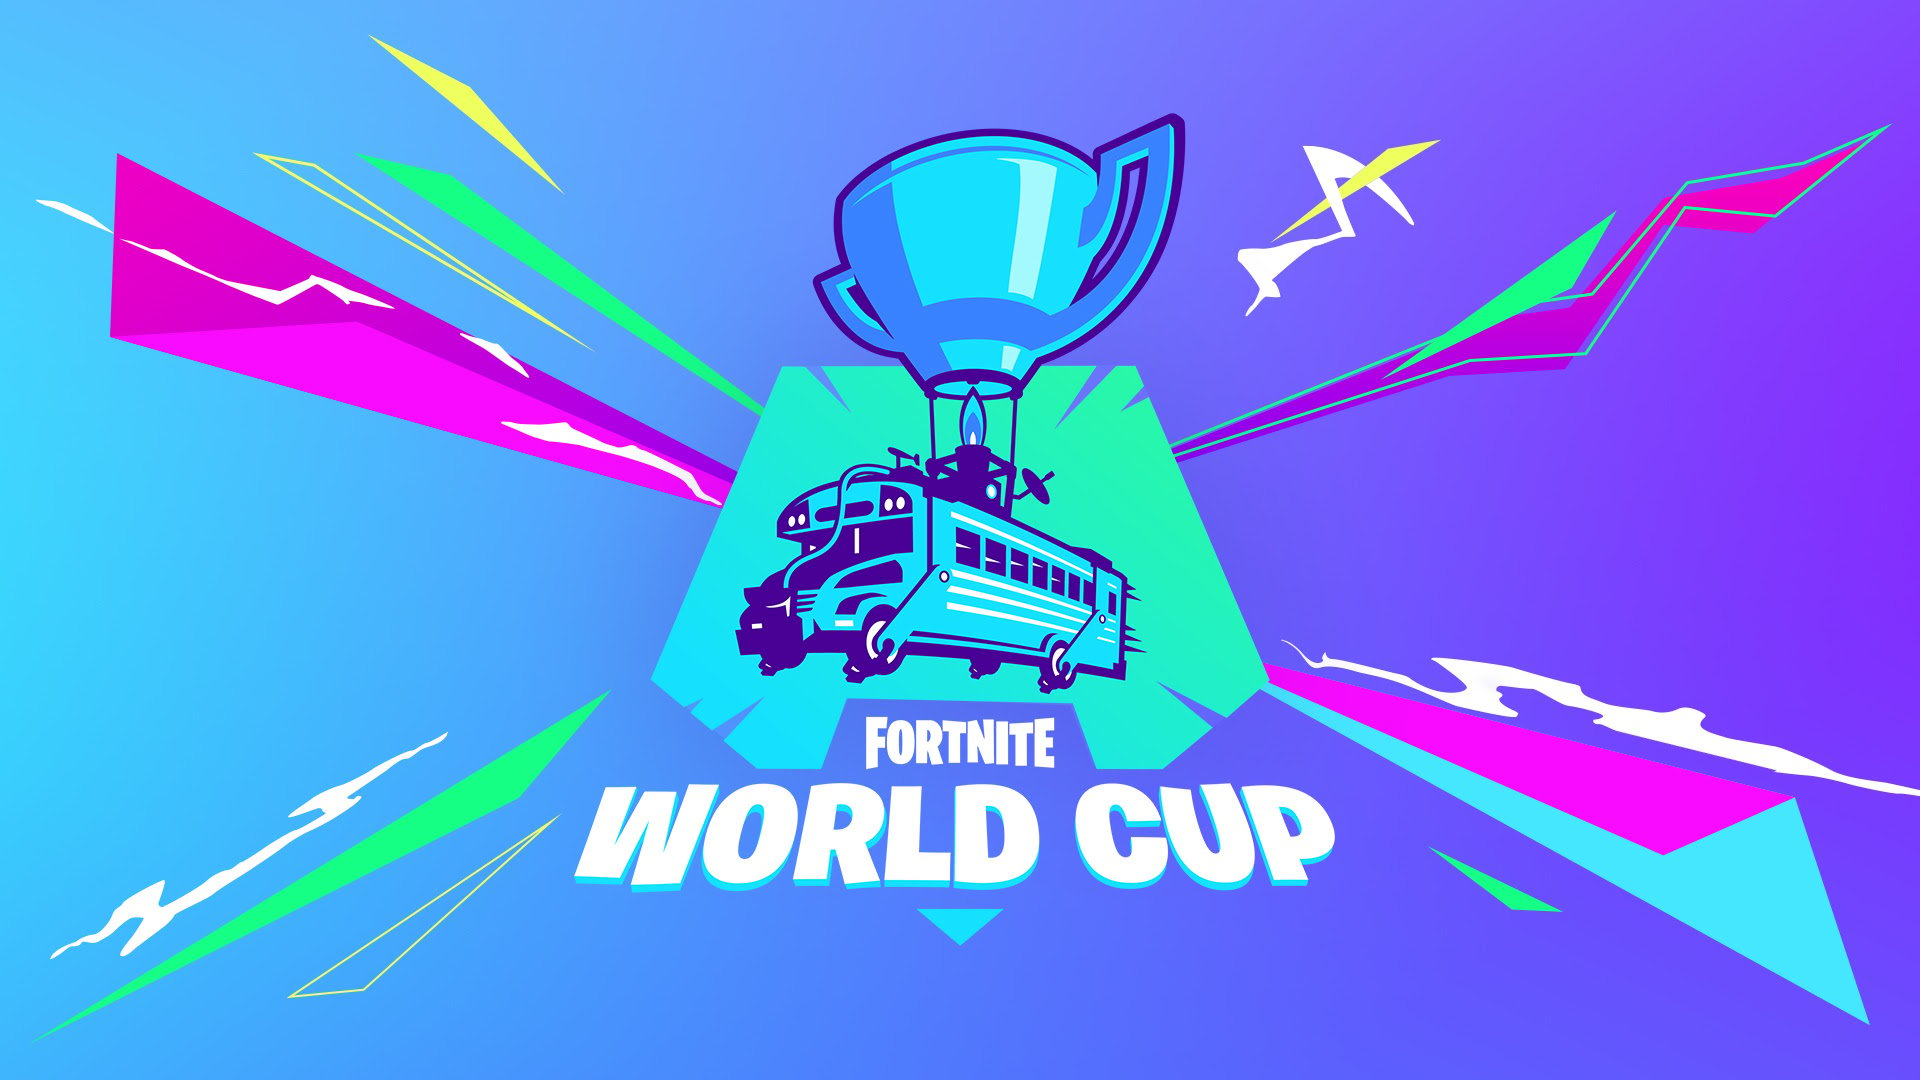 Fortnite World Cup matches can now be spectated live in the game